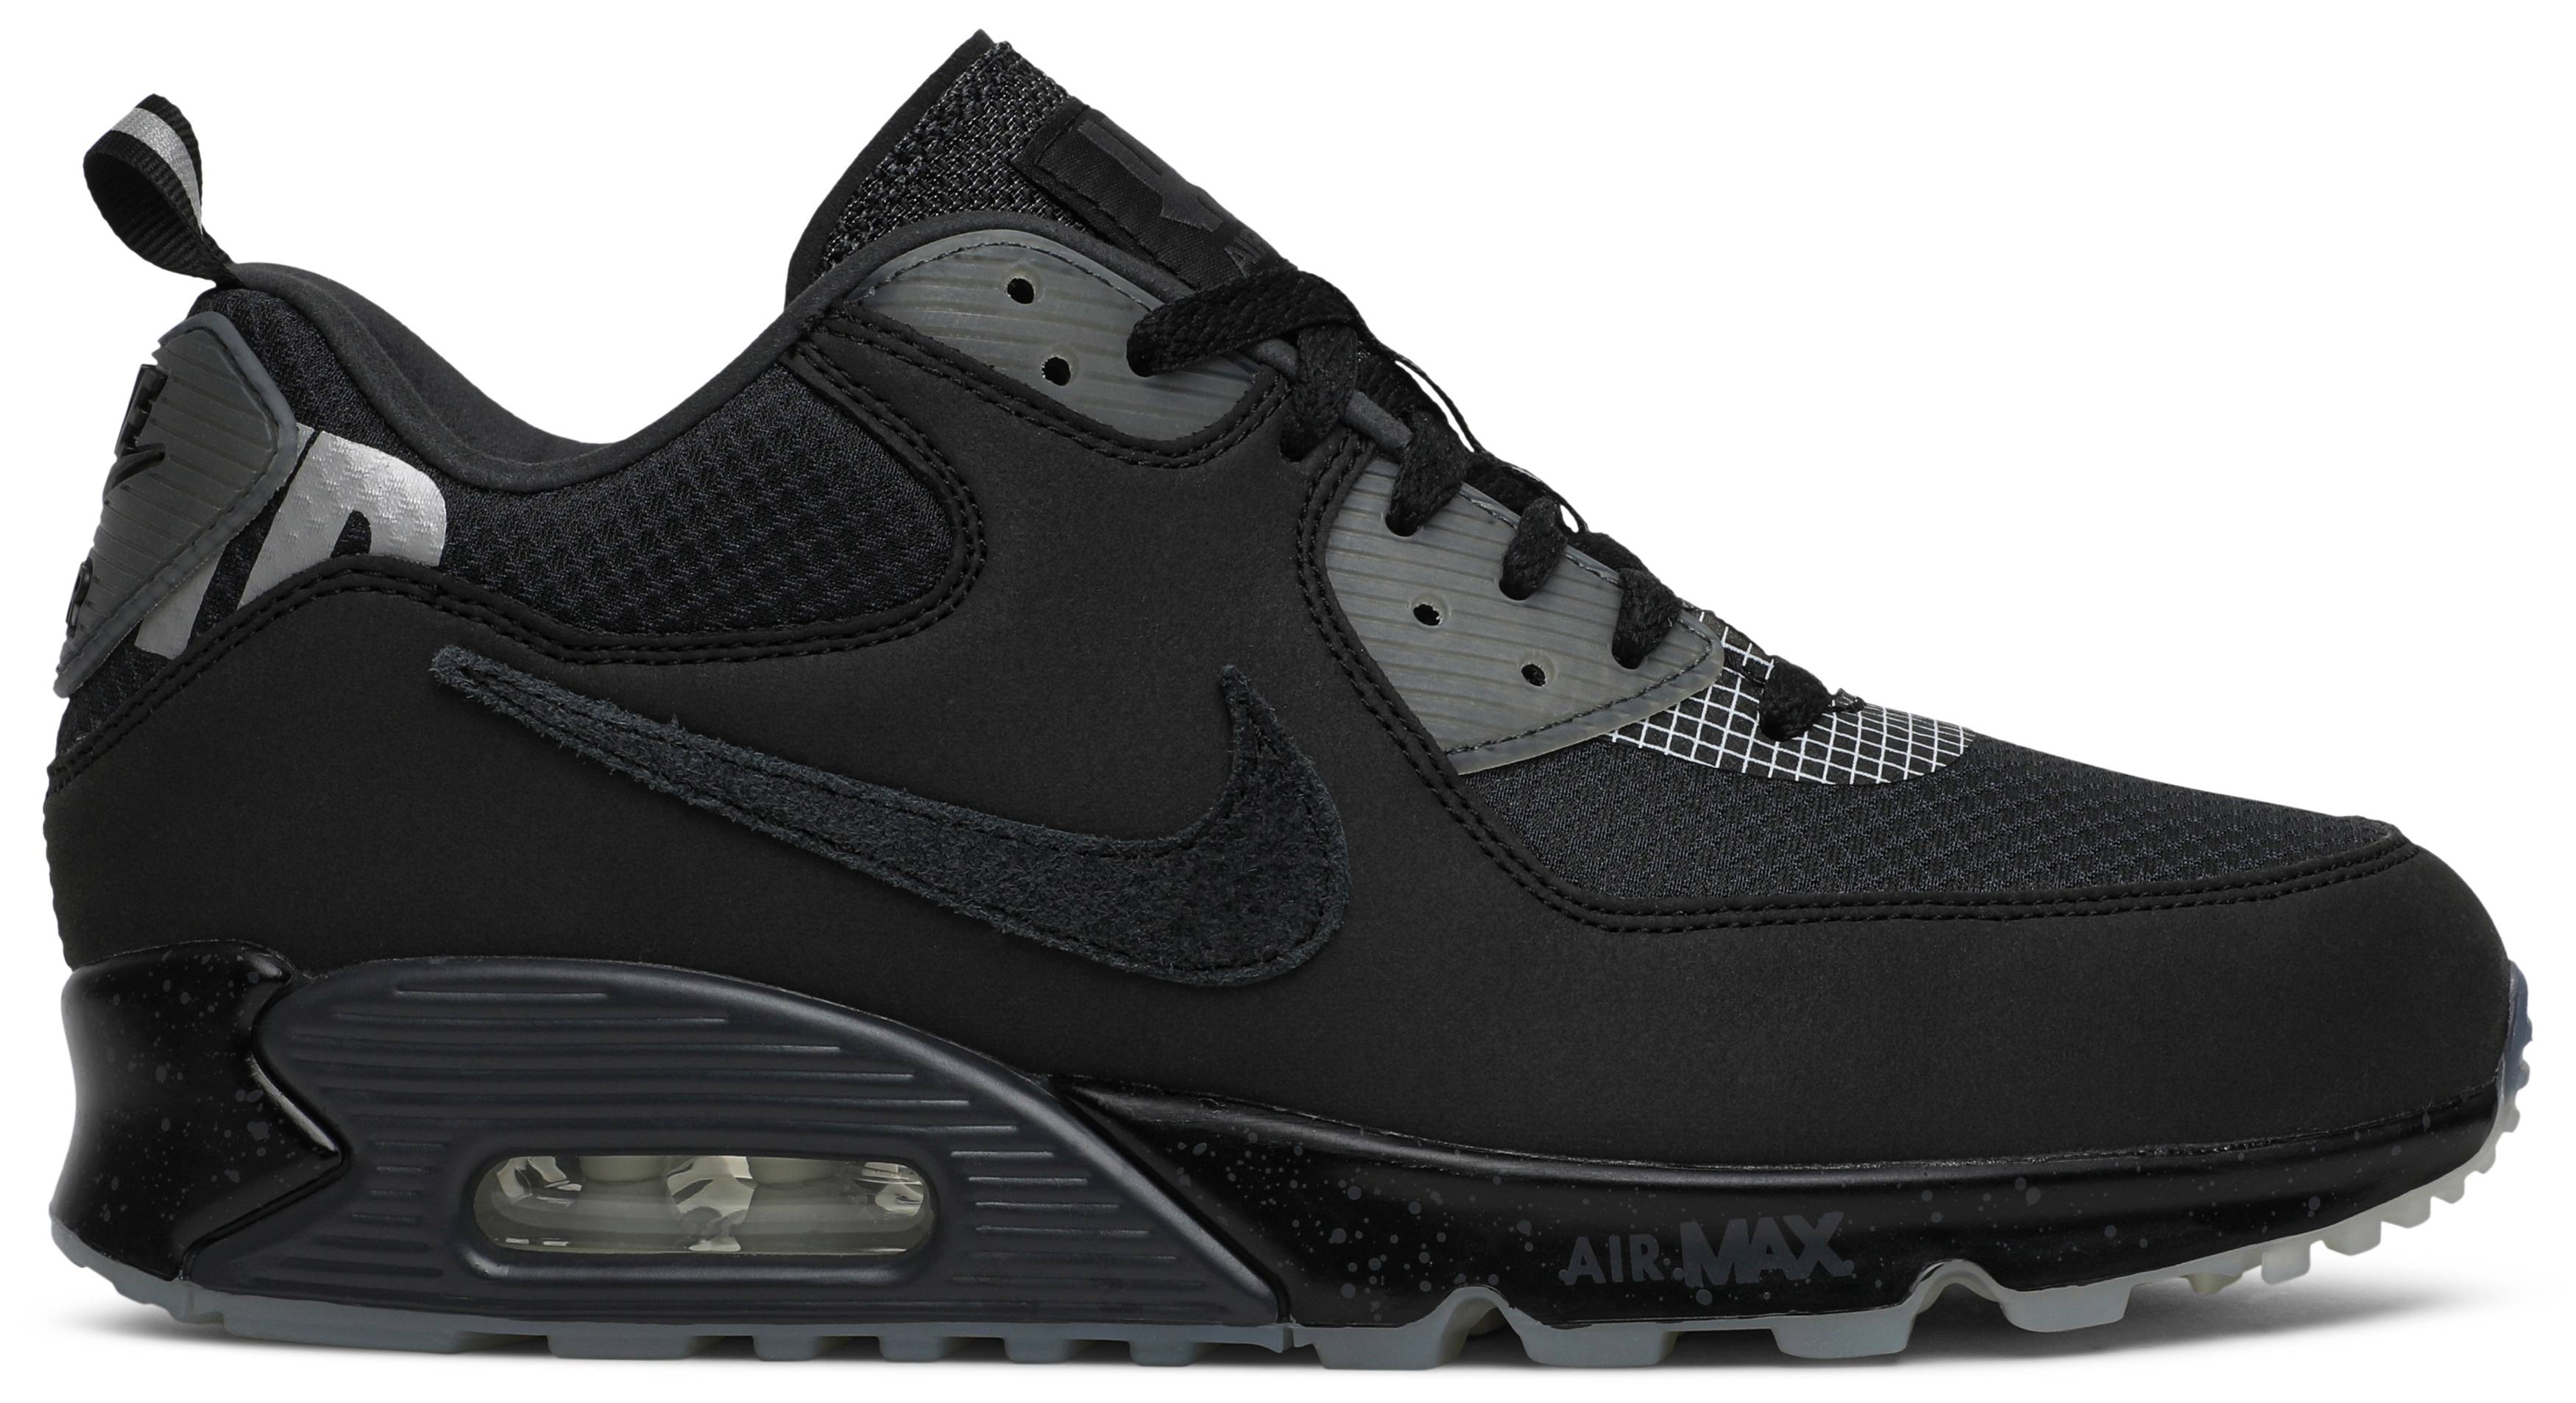 Undefeated x Air Max 90 'Anthracite' Nike CQ2289 002 GOAT